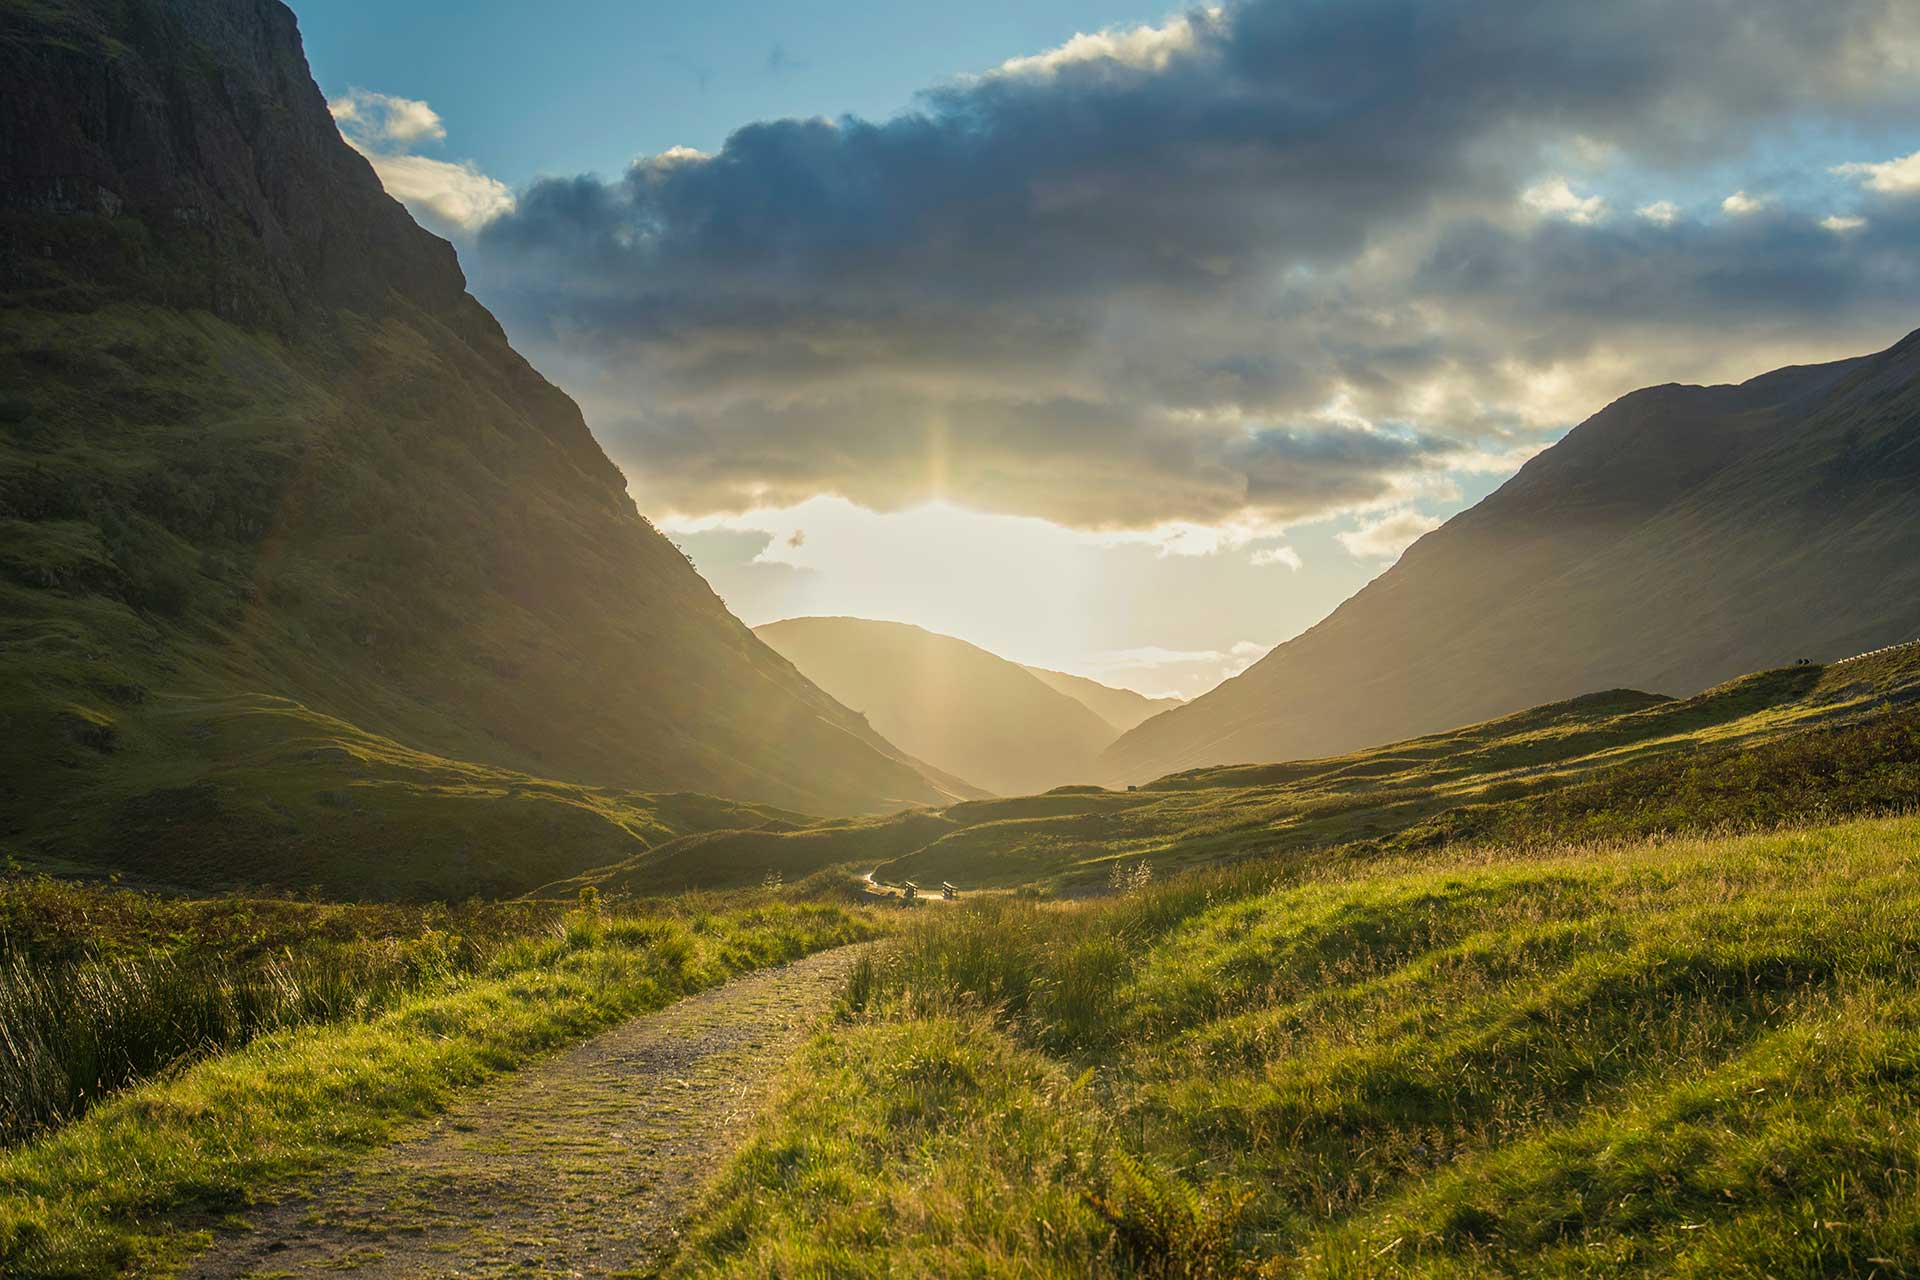 A sunset view of Glencoe in the Highlands of Scotland